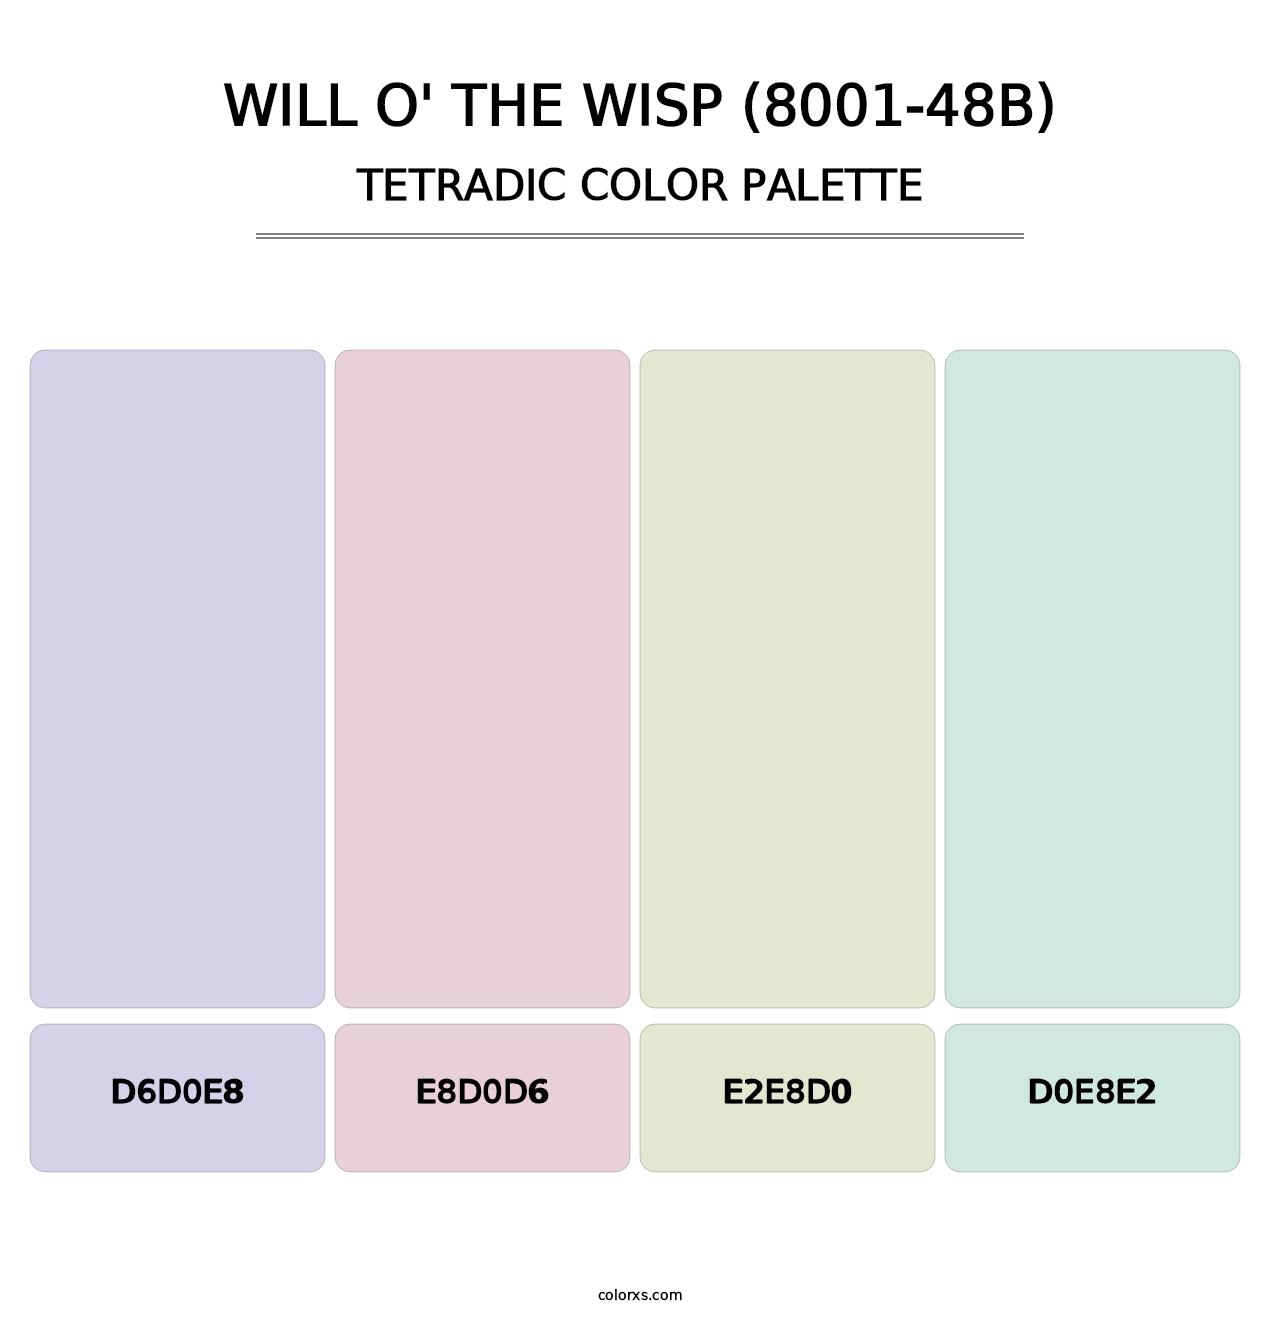 Will o' the Wisp (8001-48B) - Tetradic Color Palette